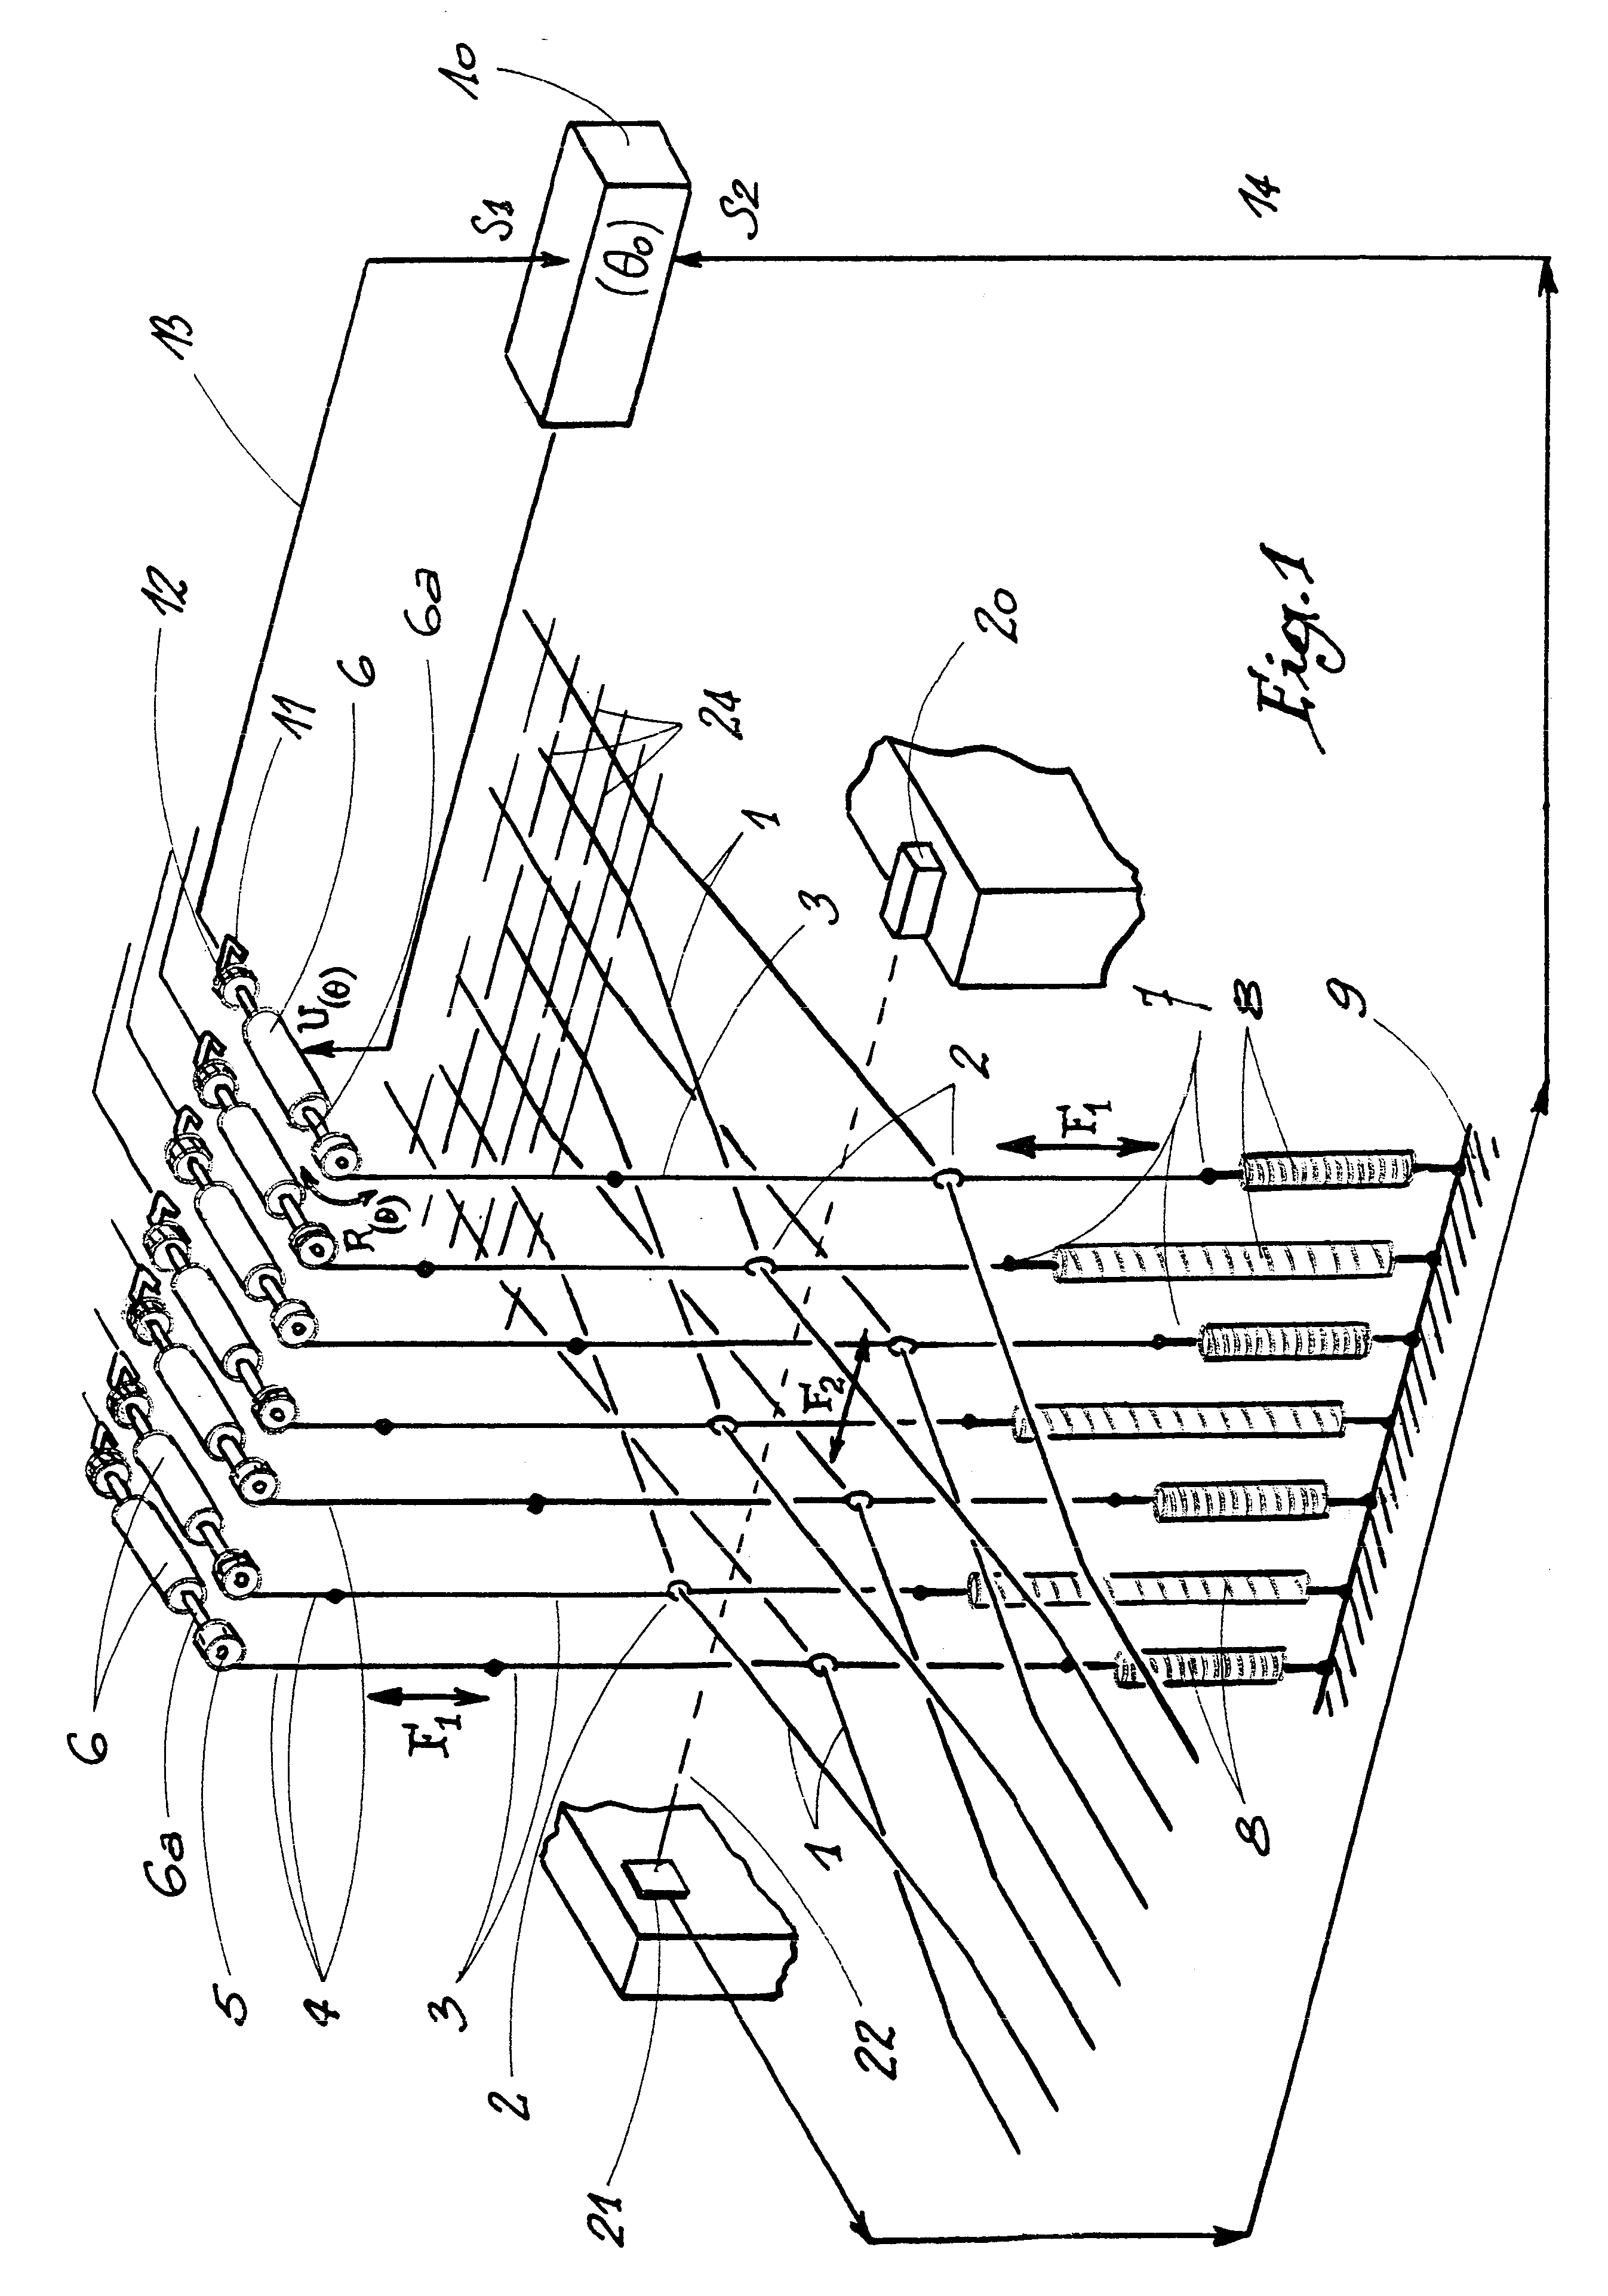 Process and device for positioning weaving loom warp yarns